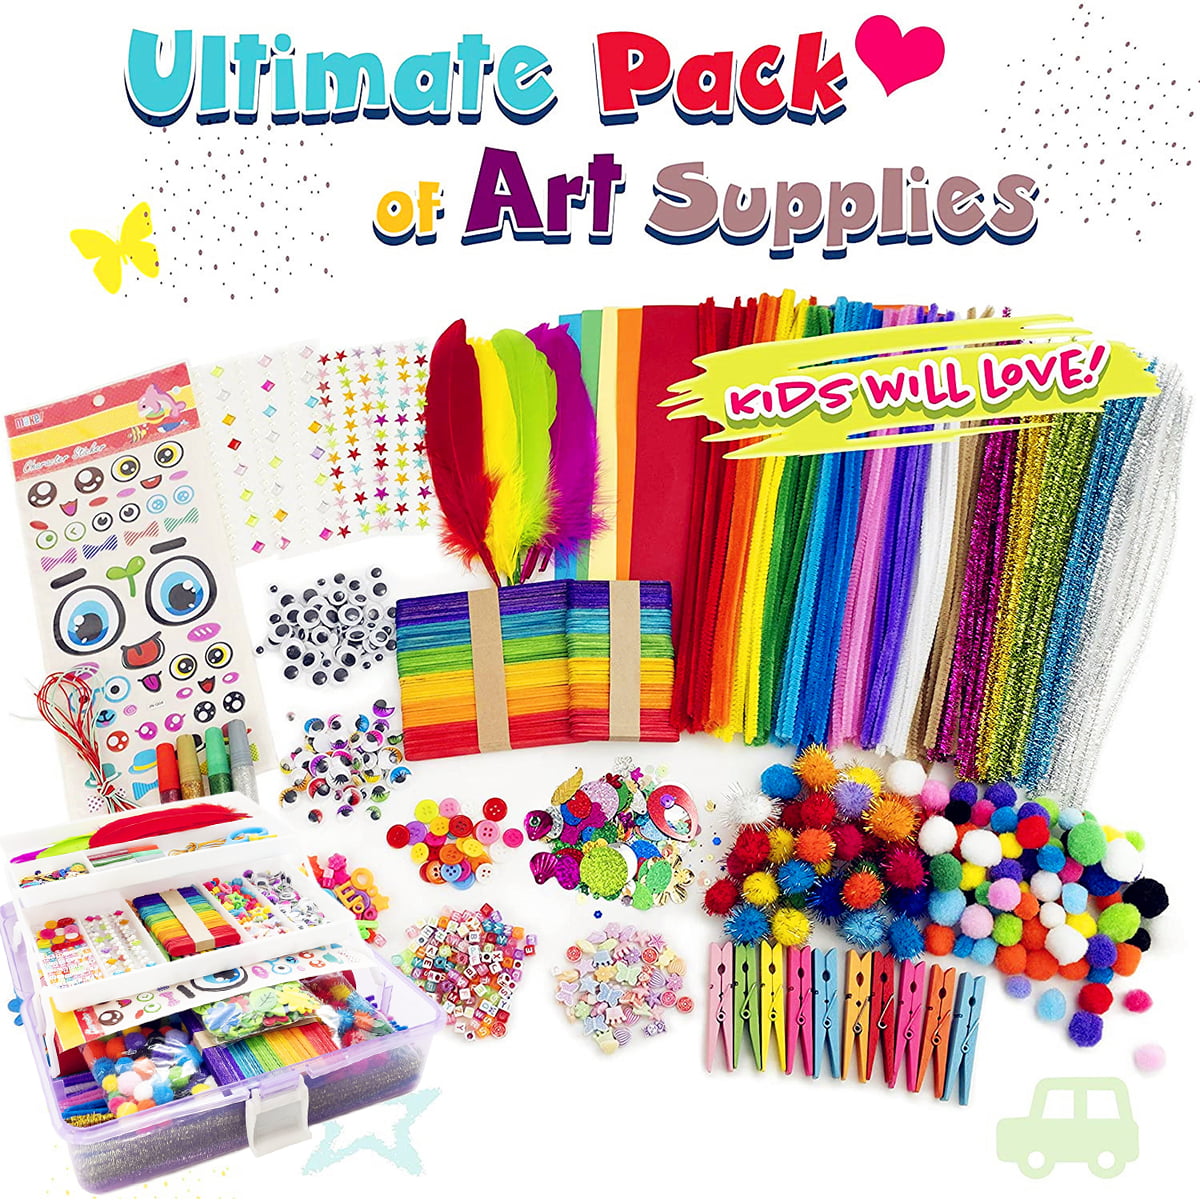 1405 Pcs Art and Craft Supplies for Kids, Toddler DIY Craft Art Supply Set  Included Pipe Cleaners, Pom Poms, Feather, Folding Storage Box - All in One